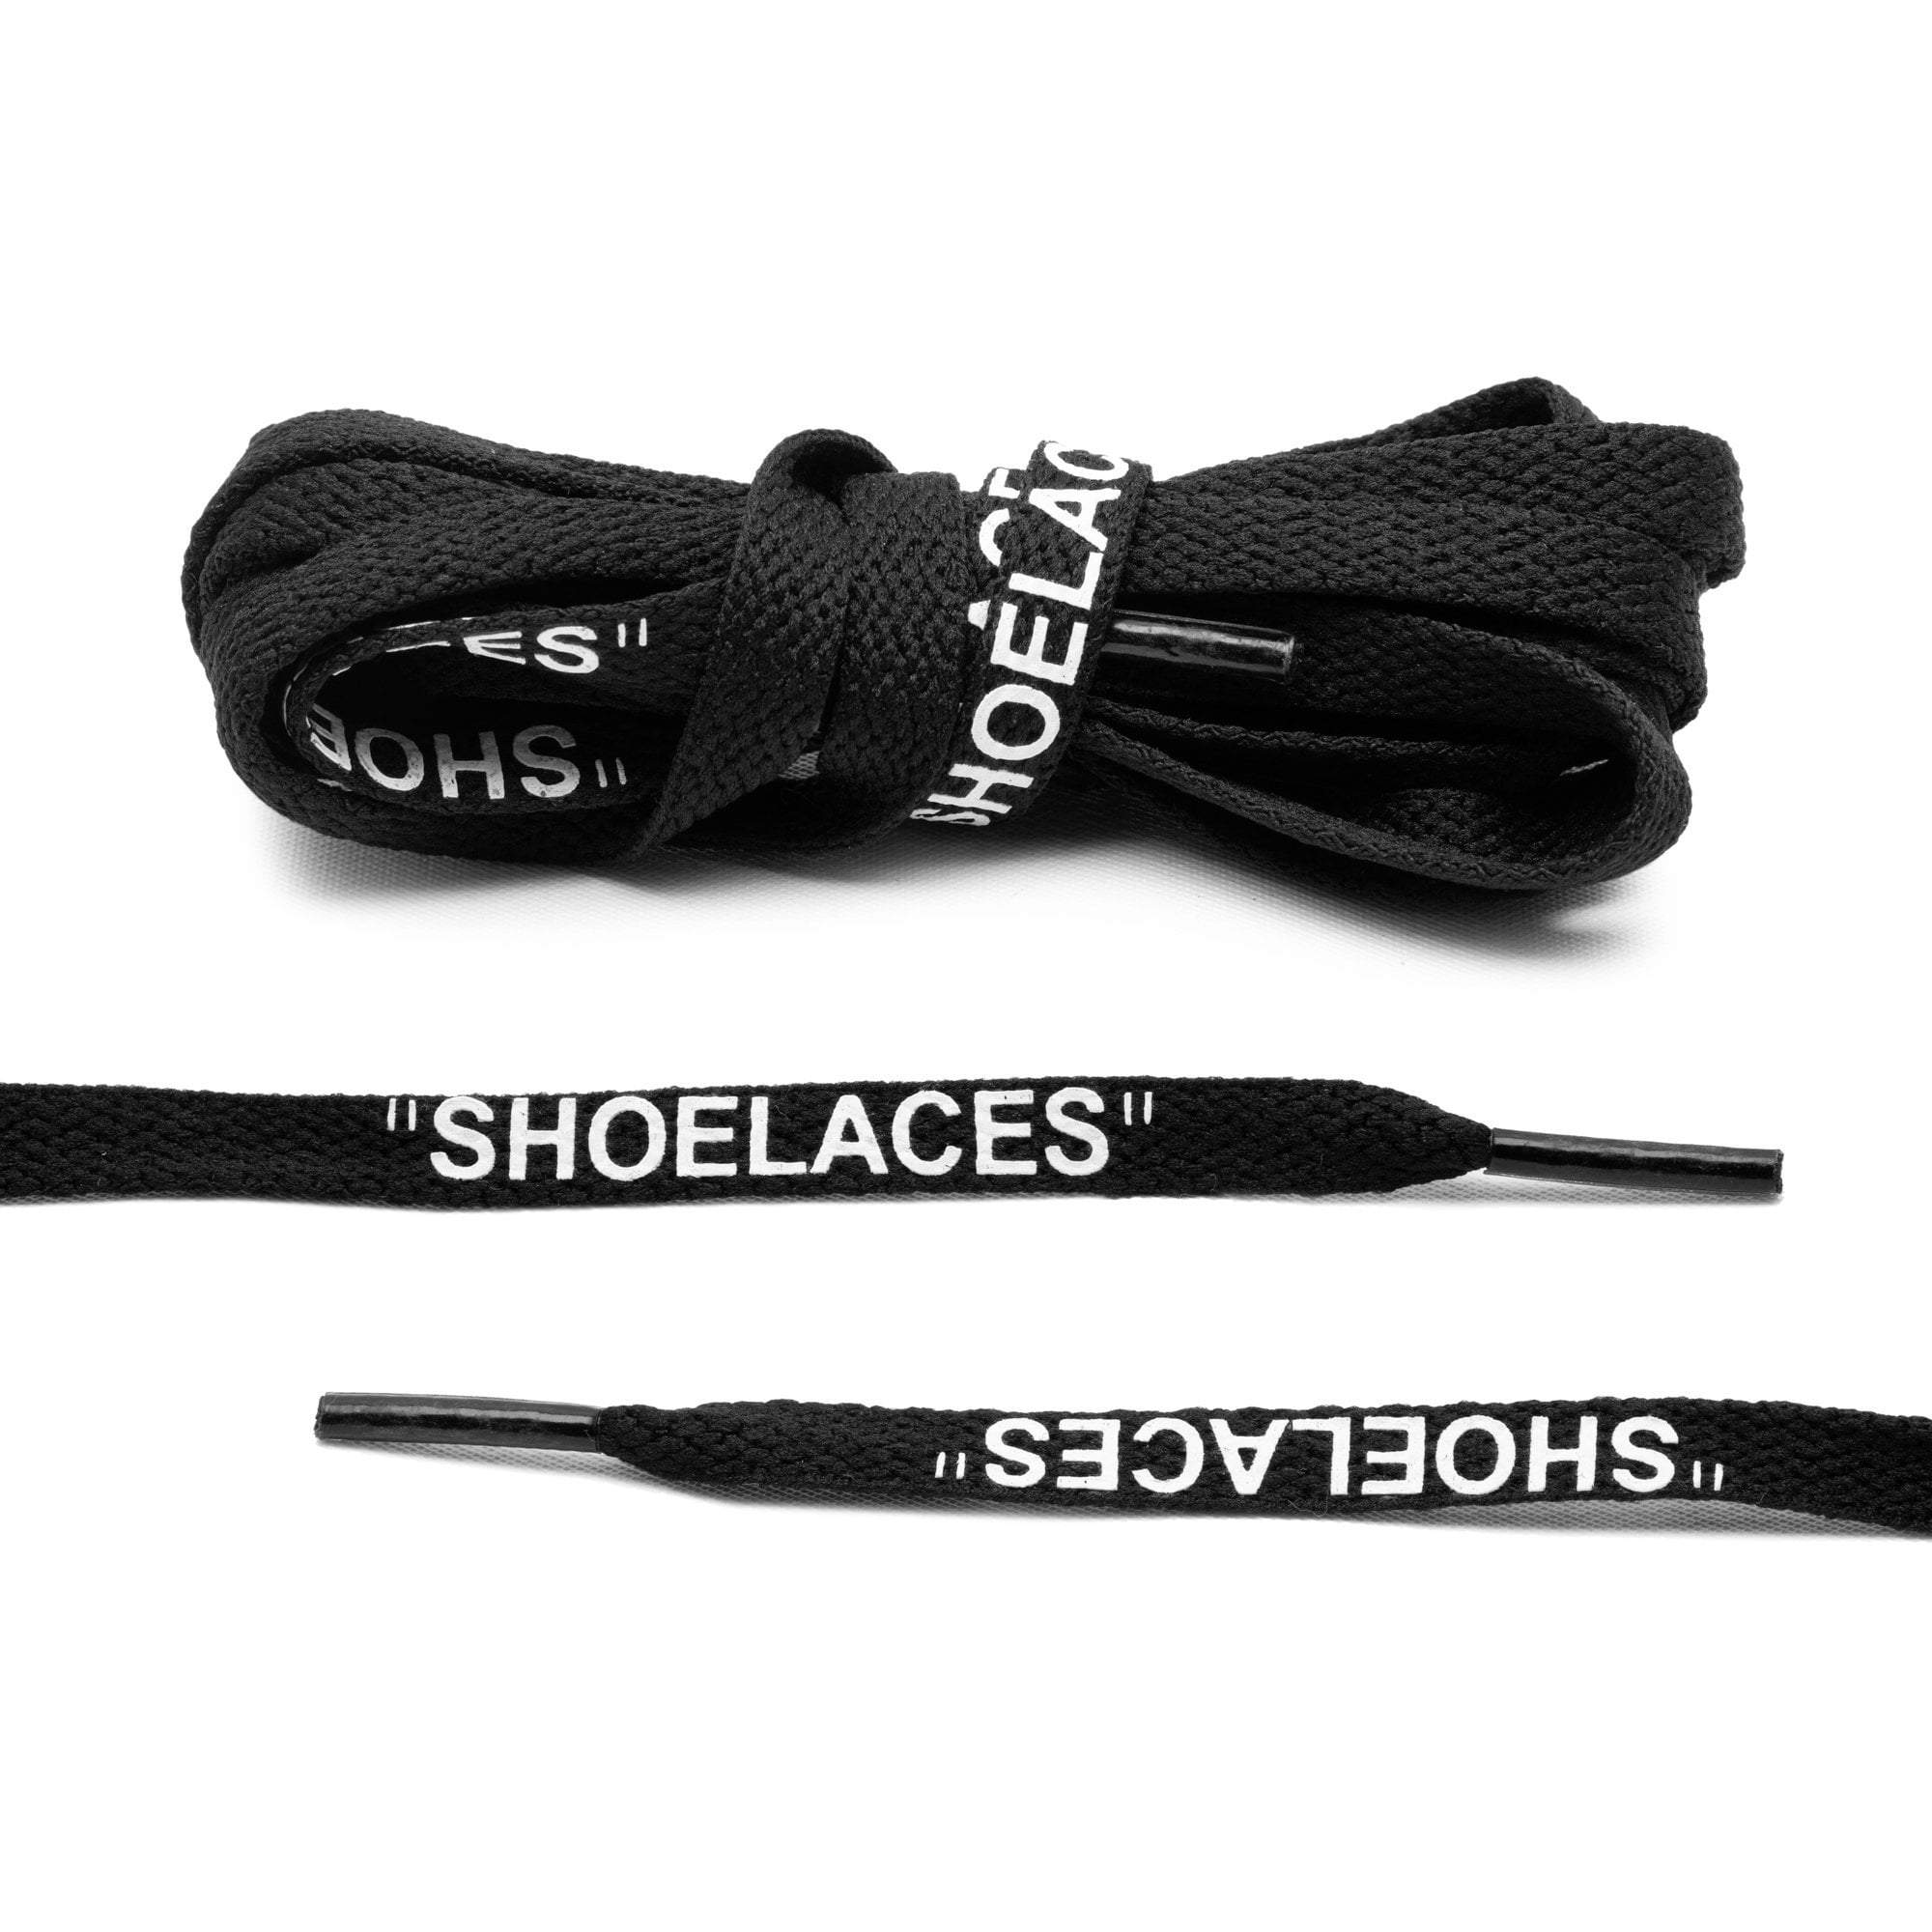 Off-White Style "Shoelaces" By Lace Lab